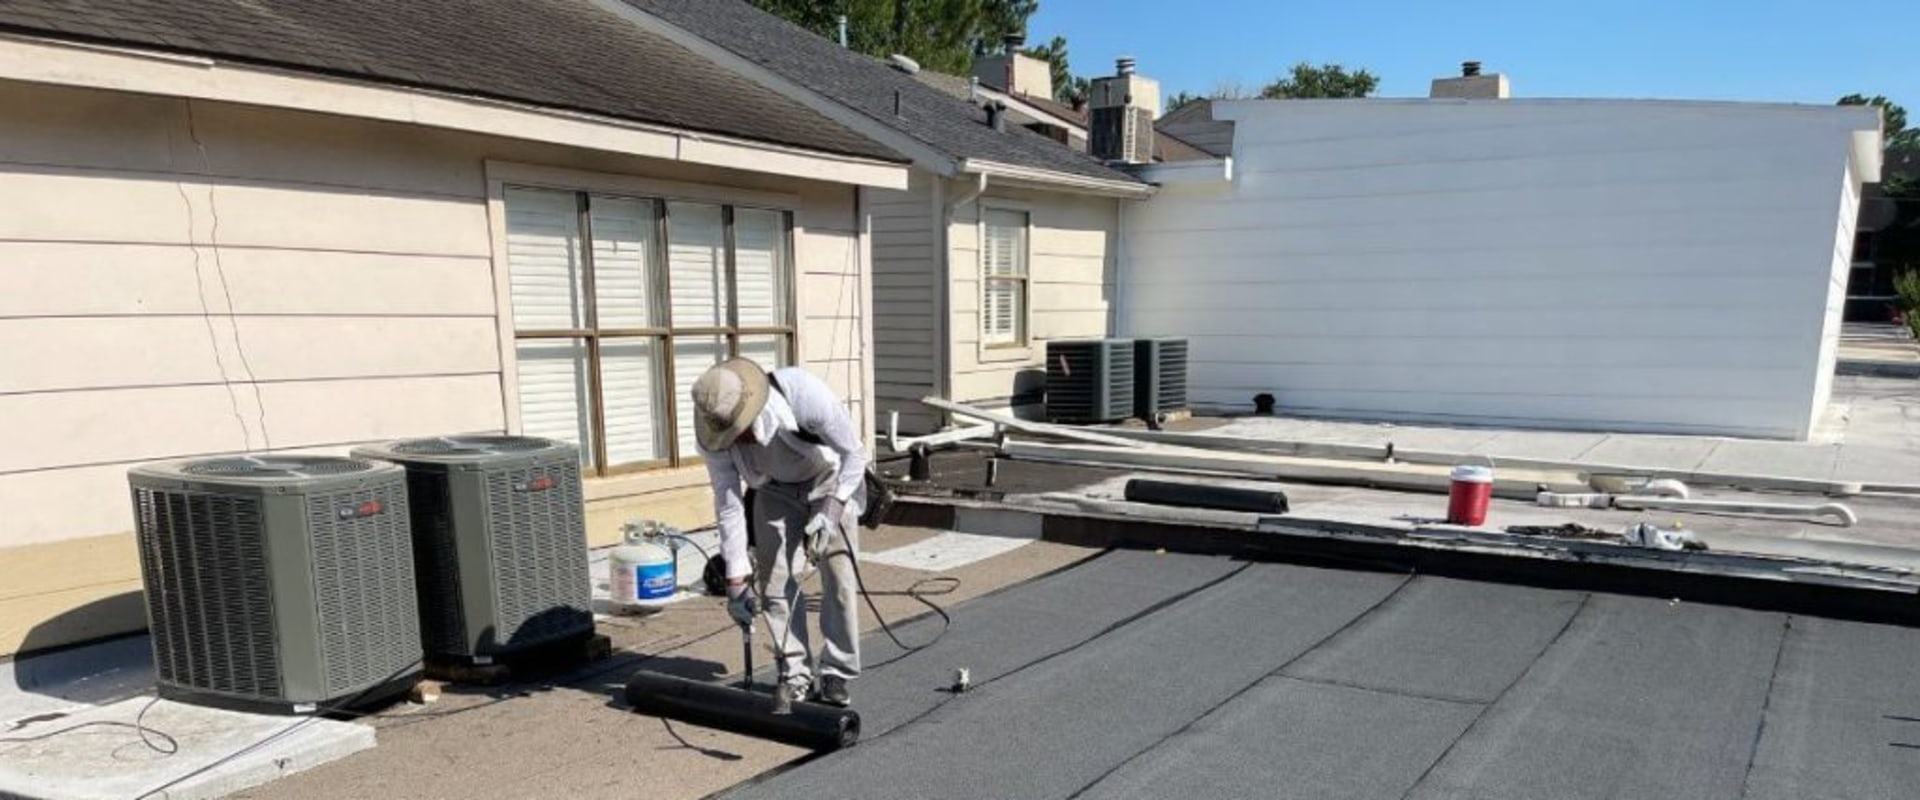 How much does it cost to install tpo roof?